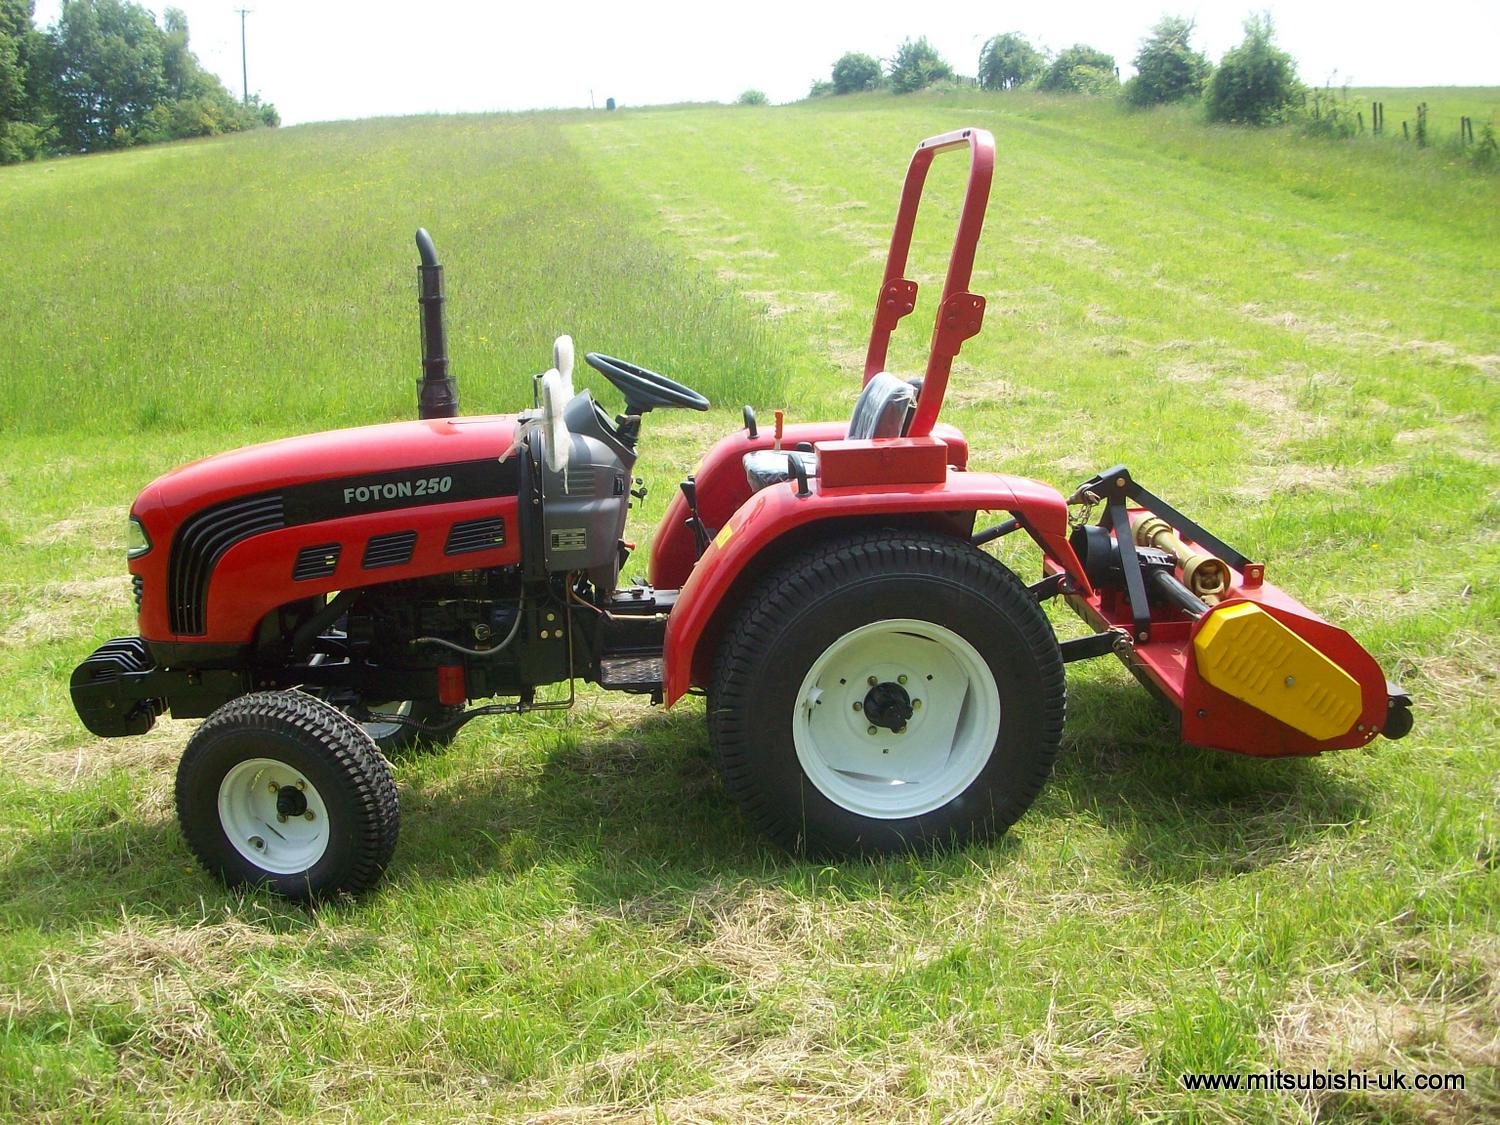 FOTON 250 Compact Tractor New Flail Mower Complete Package 25 Hp ...